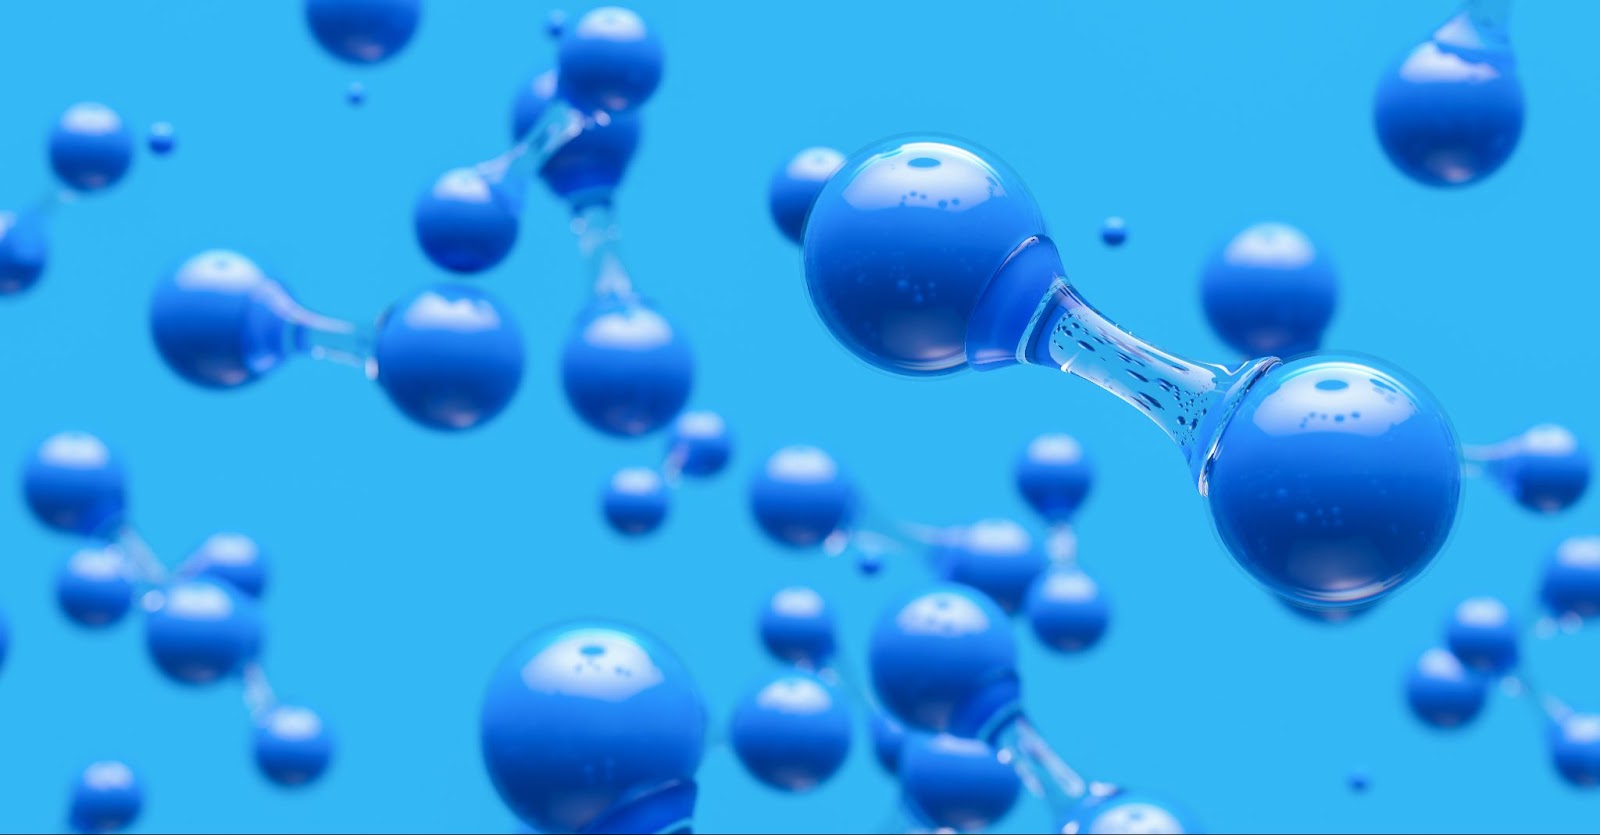 3D rendering of blue spherical molecules interconnected by transparent links